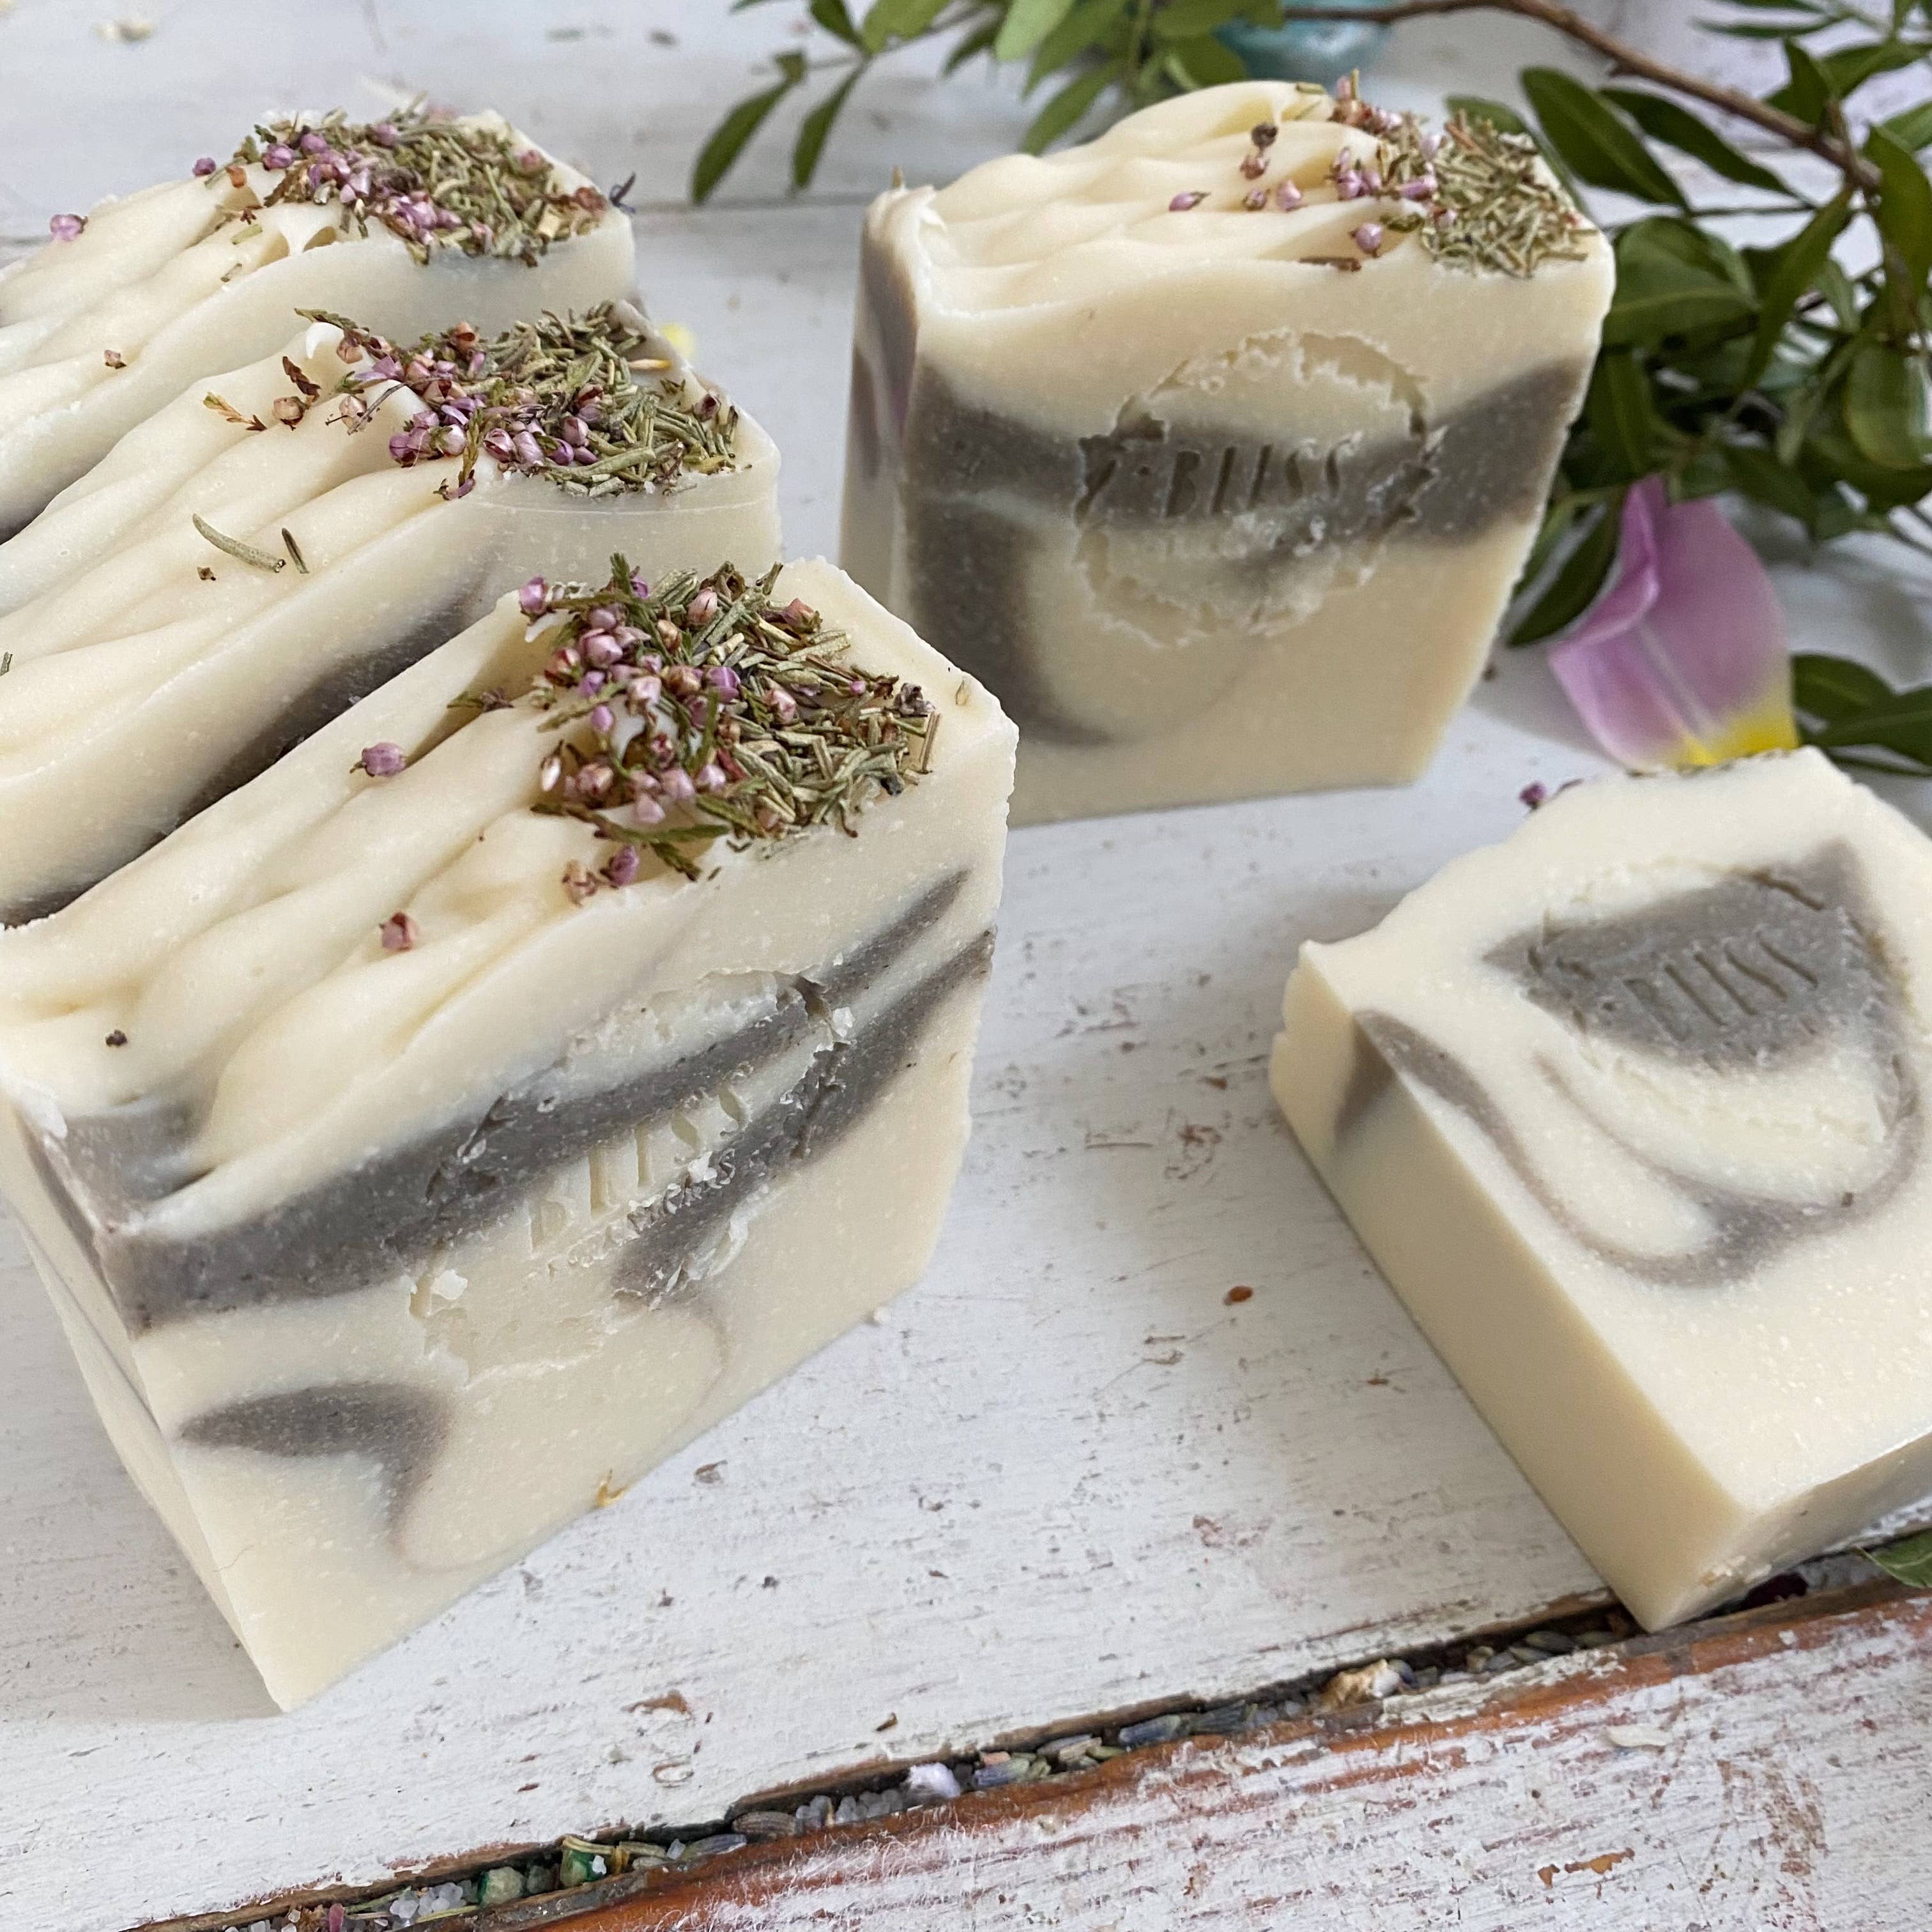 Bliss Botanicals Forest Fairy Soap bars with lavender buds and aromatherapy essential oil displayed alongside pink petals and green leaves, featuring a label titled "forest fairy" on a rustic white background.